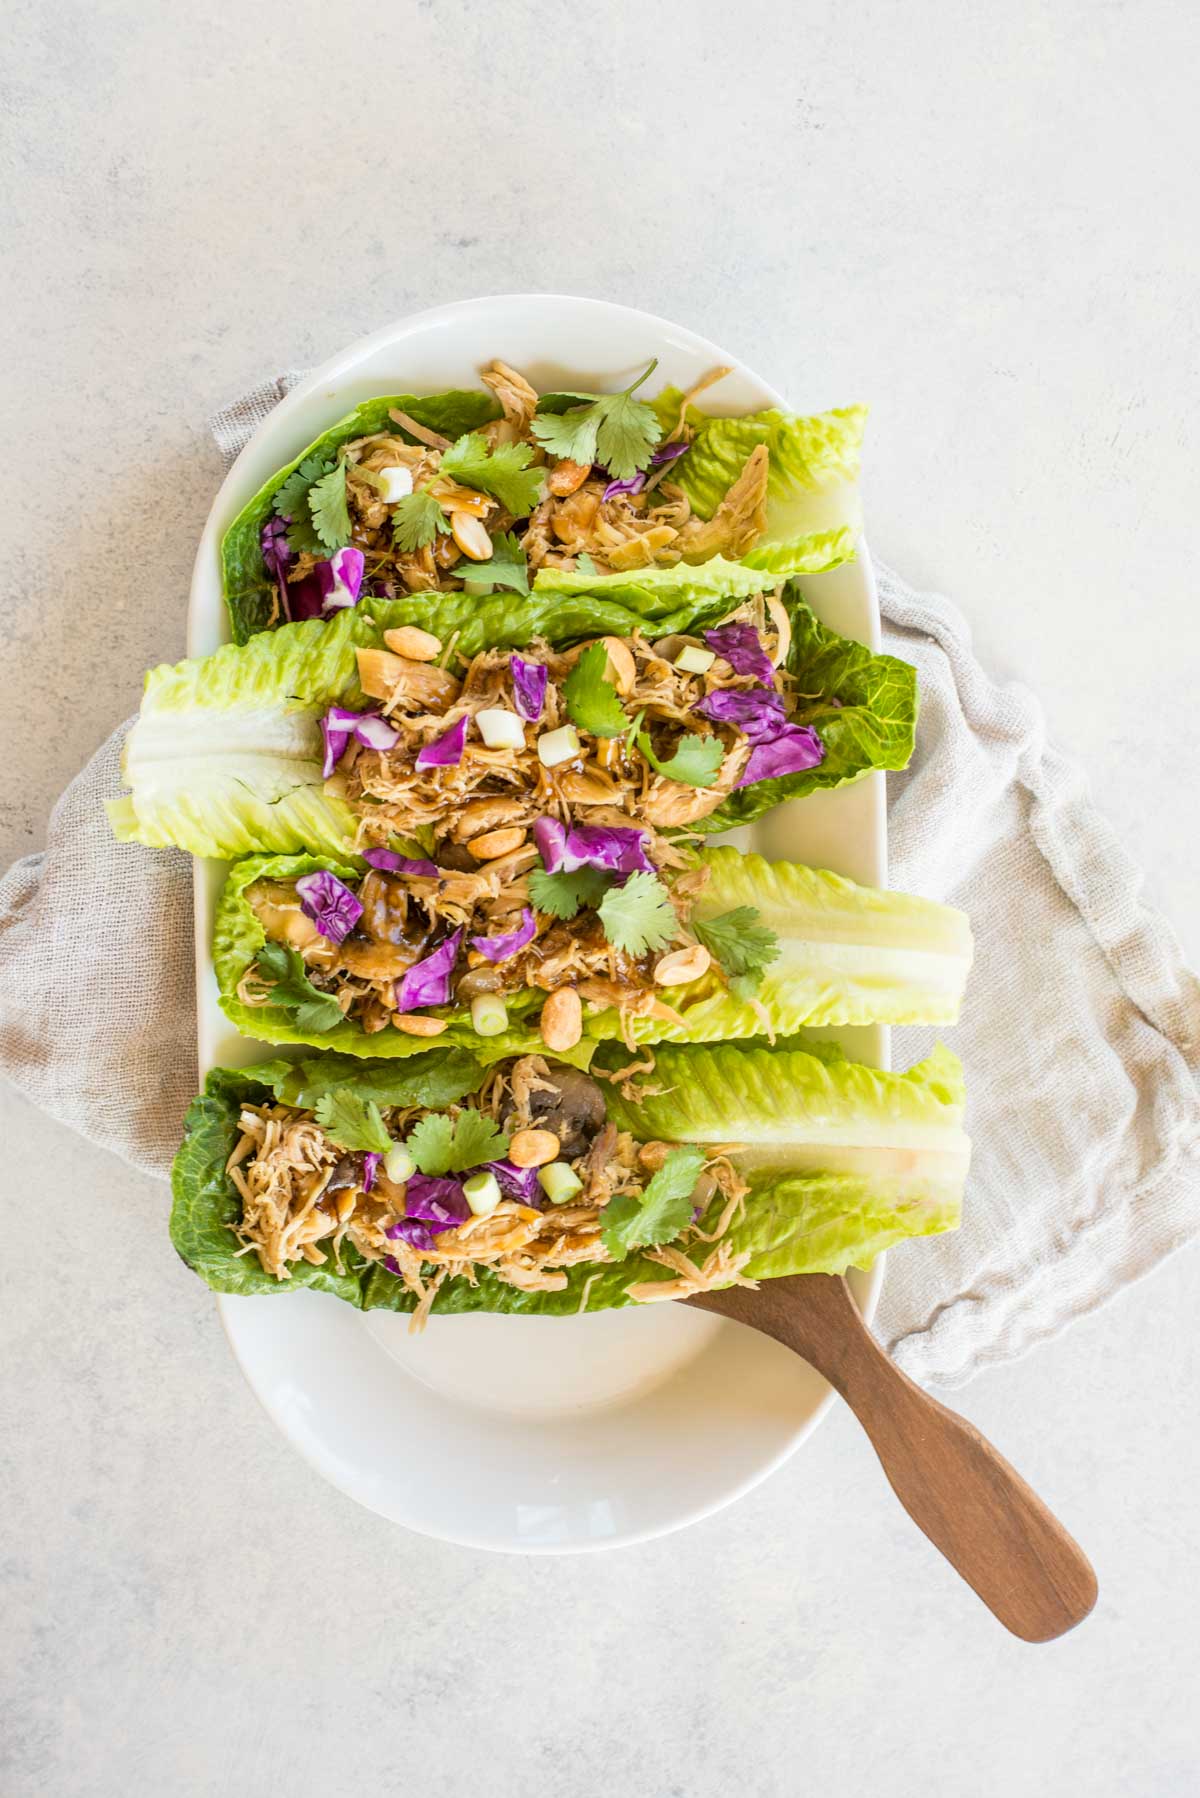 This recipe takes healthy to the next level with flavorful delicious Asian Chicken Lettuce Wraps.